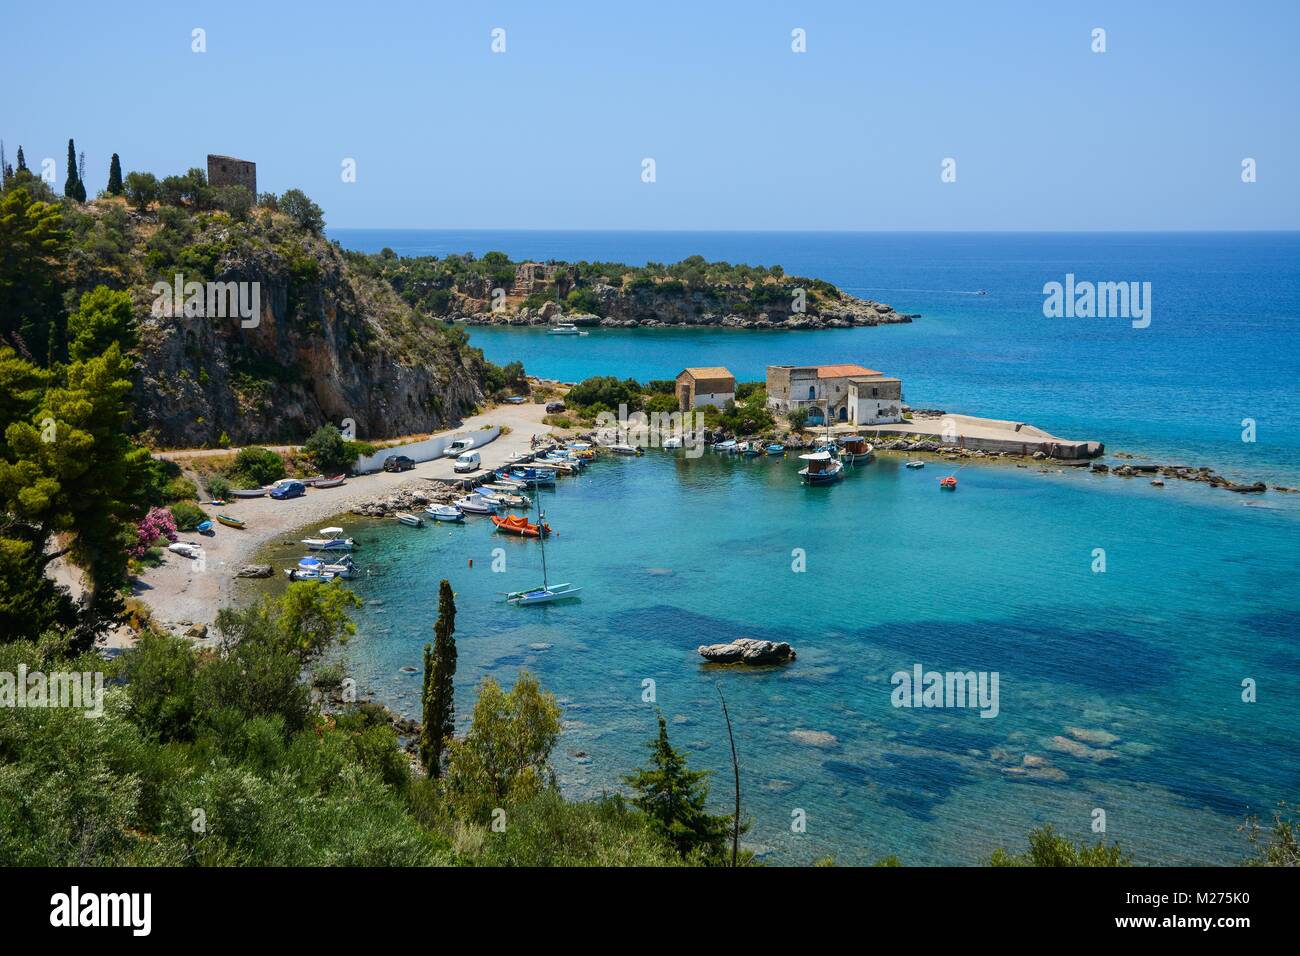 Idyllic scene of a pretty Greek harbour with boats and buildings and clear blue sea Stock Photo